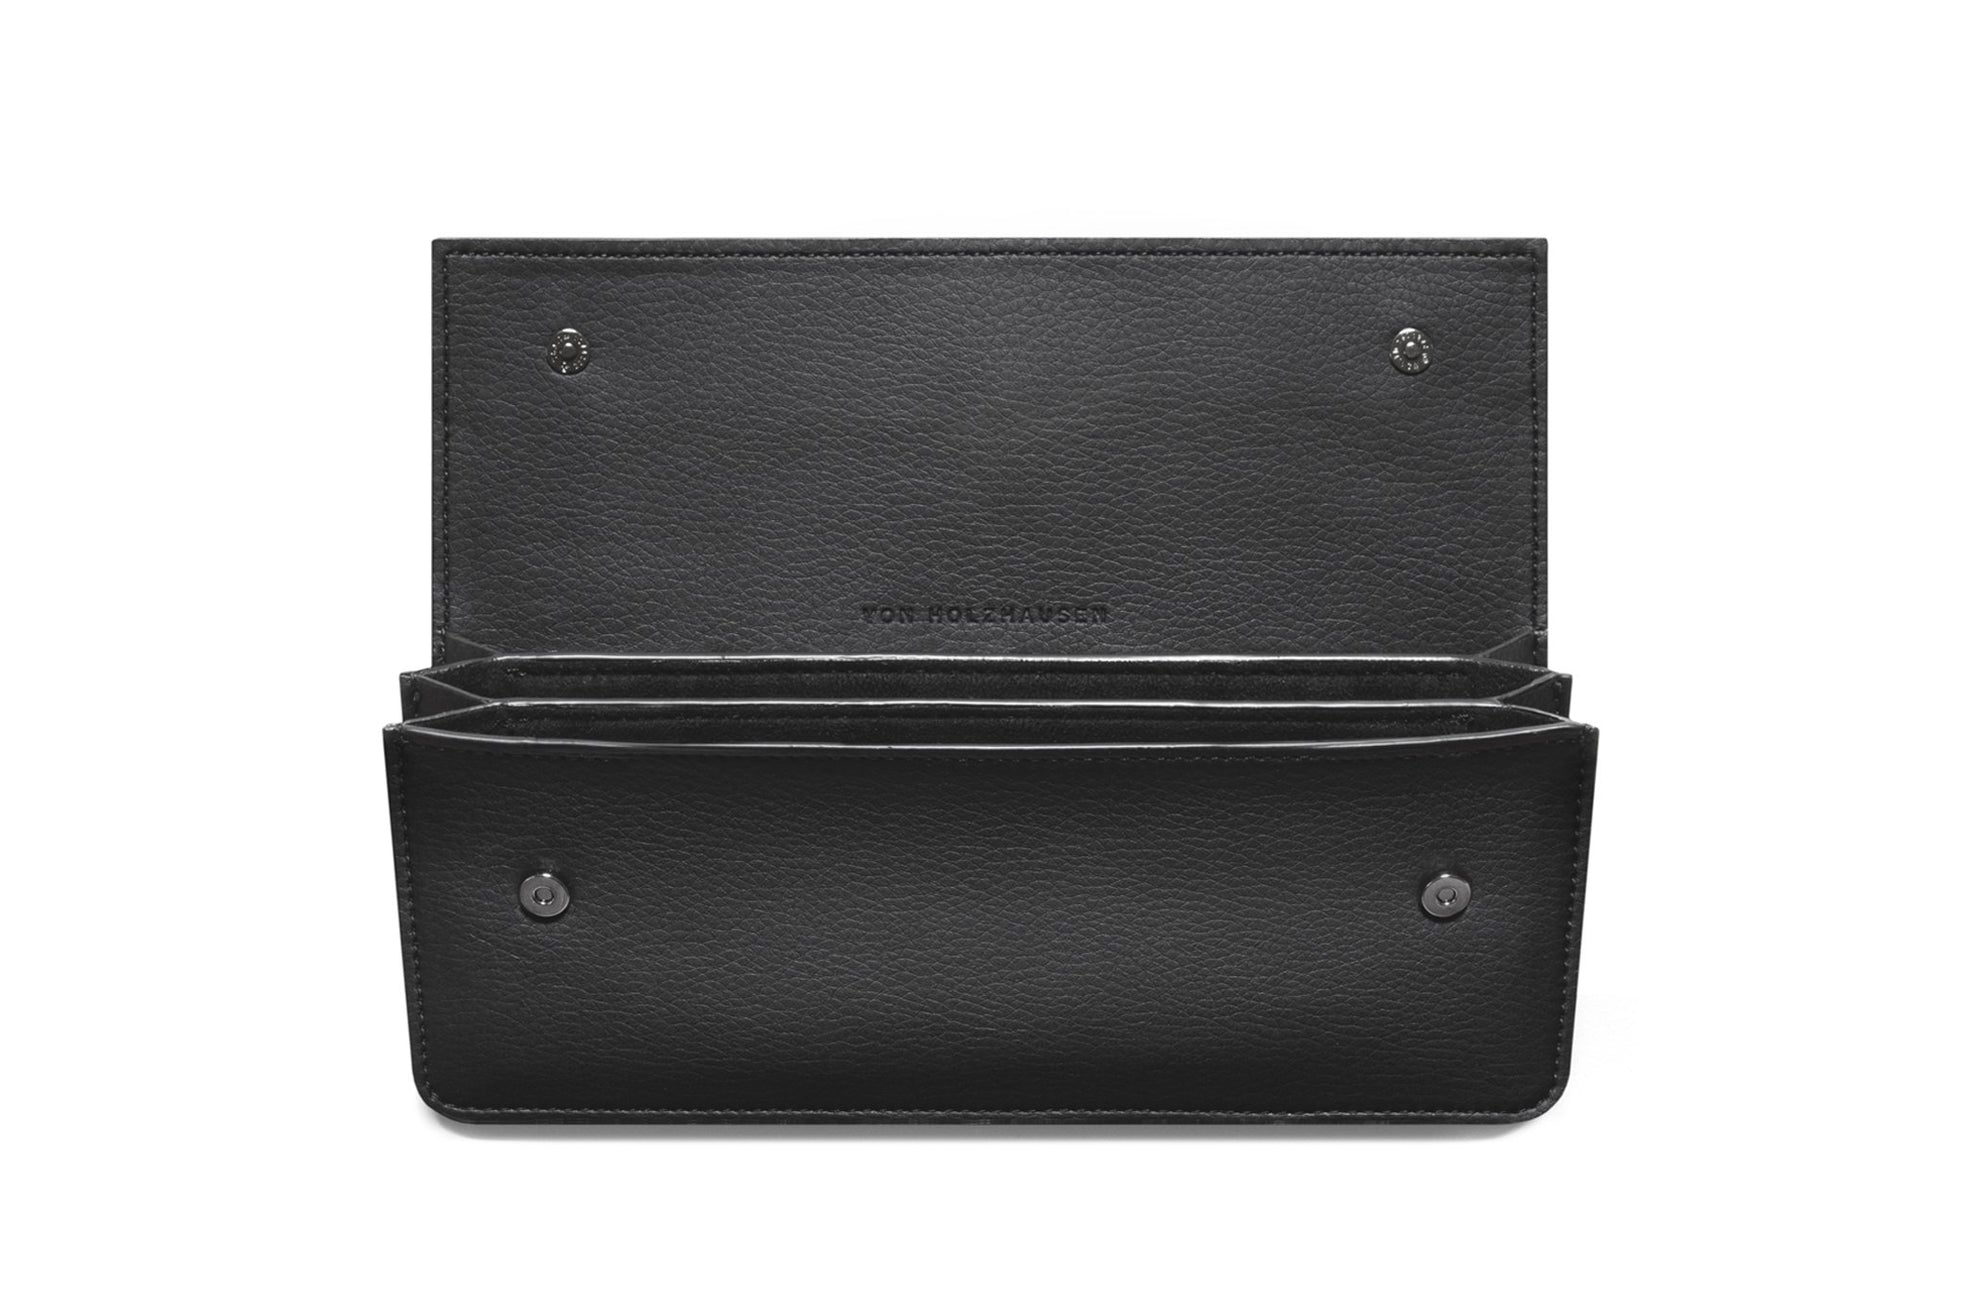 The Accordion Pouch - Sample Sale in Technik-Leather in Black image 6